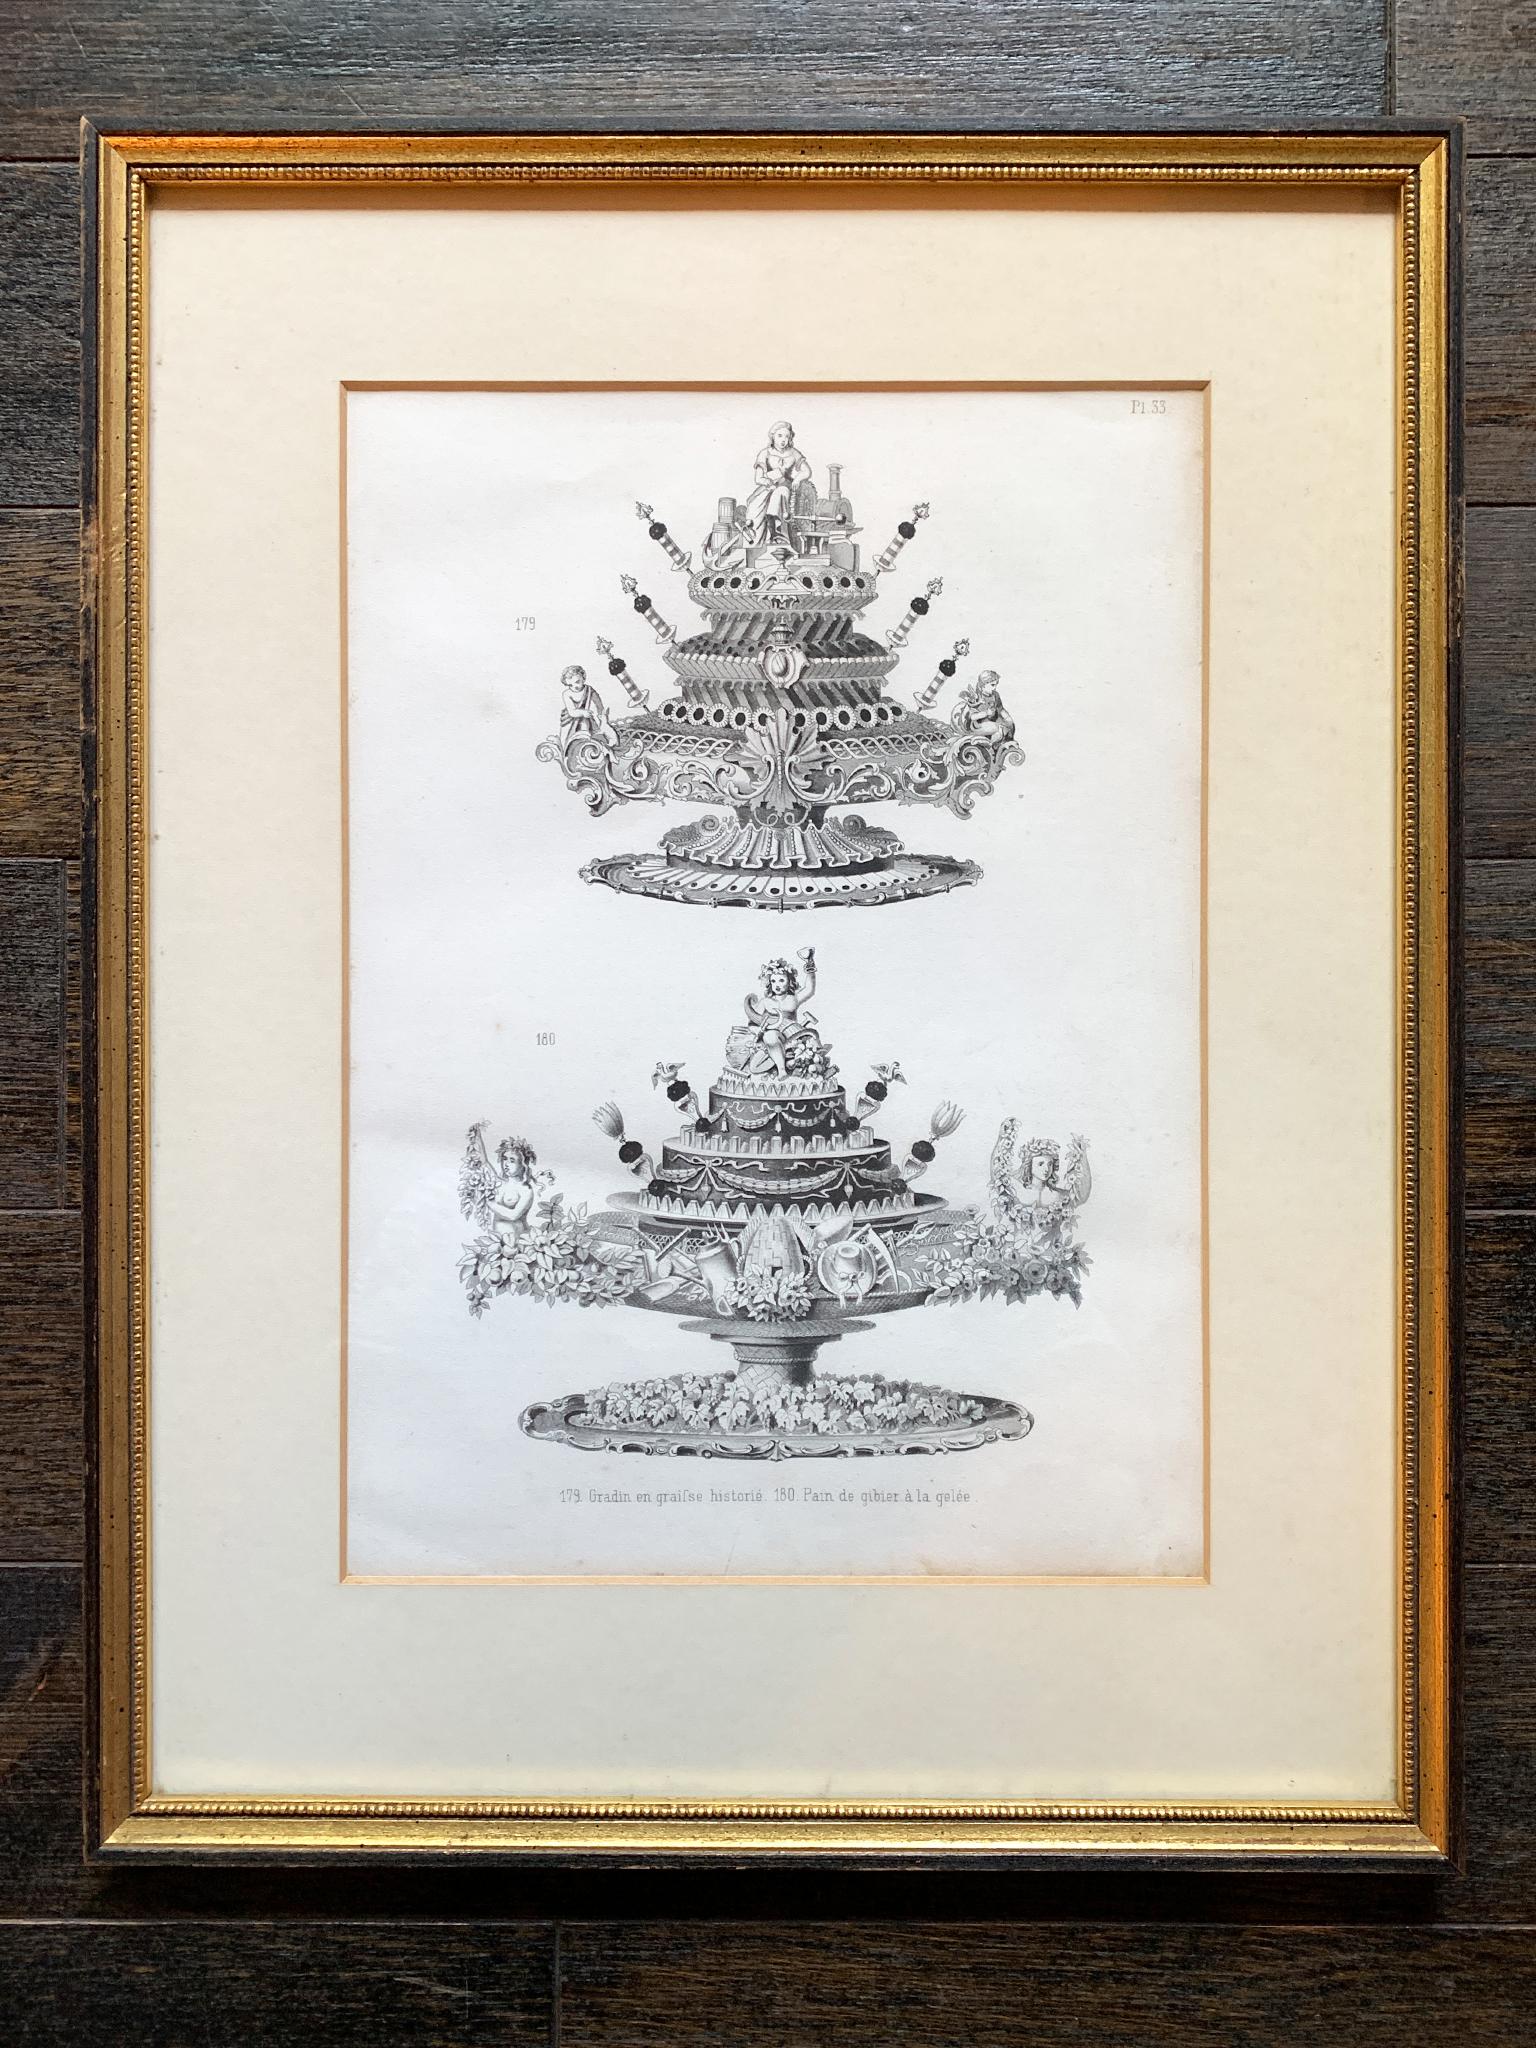 Antique Engravings From La Cuisine Classique, a Set of 4 In Good Condition For Sale In New York, NY